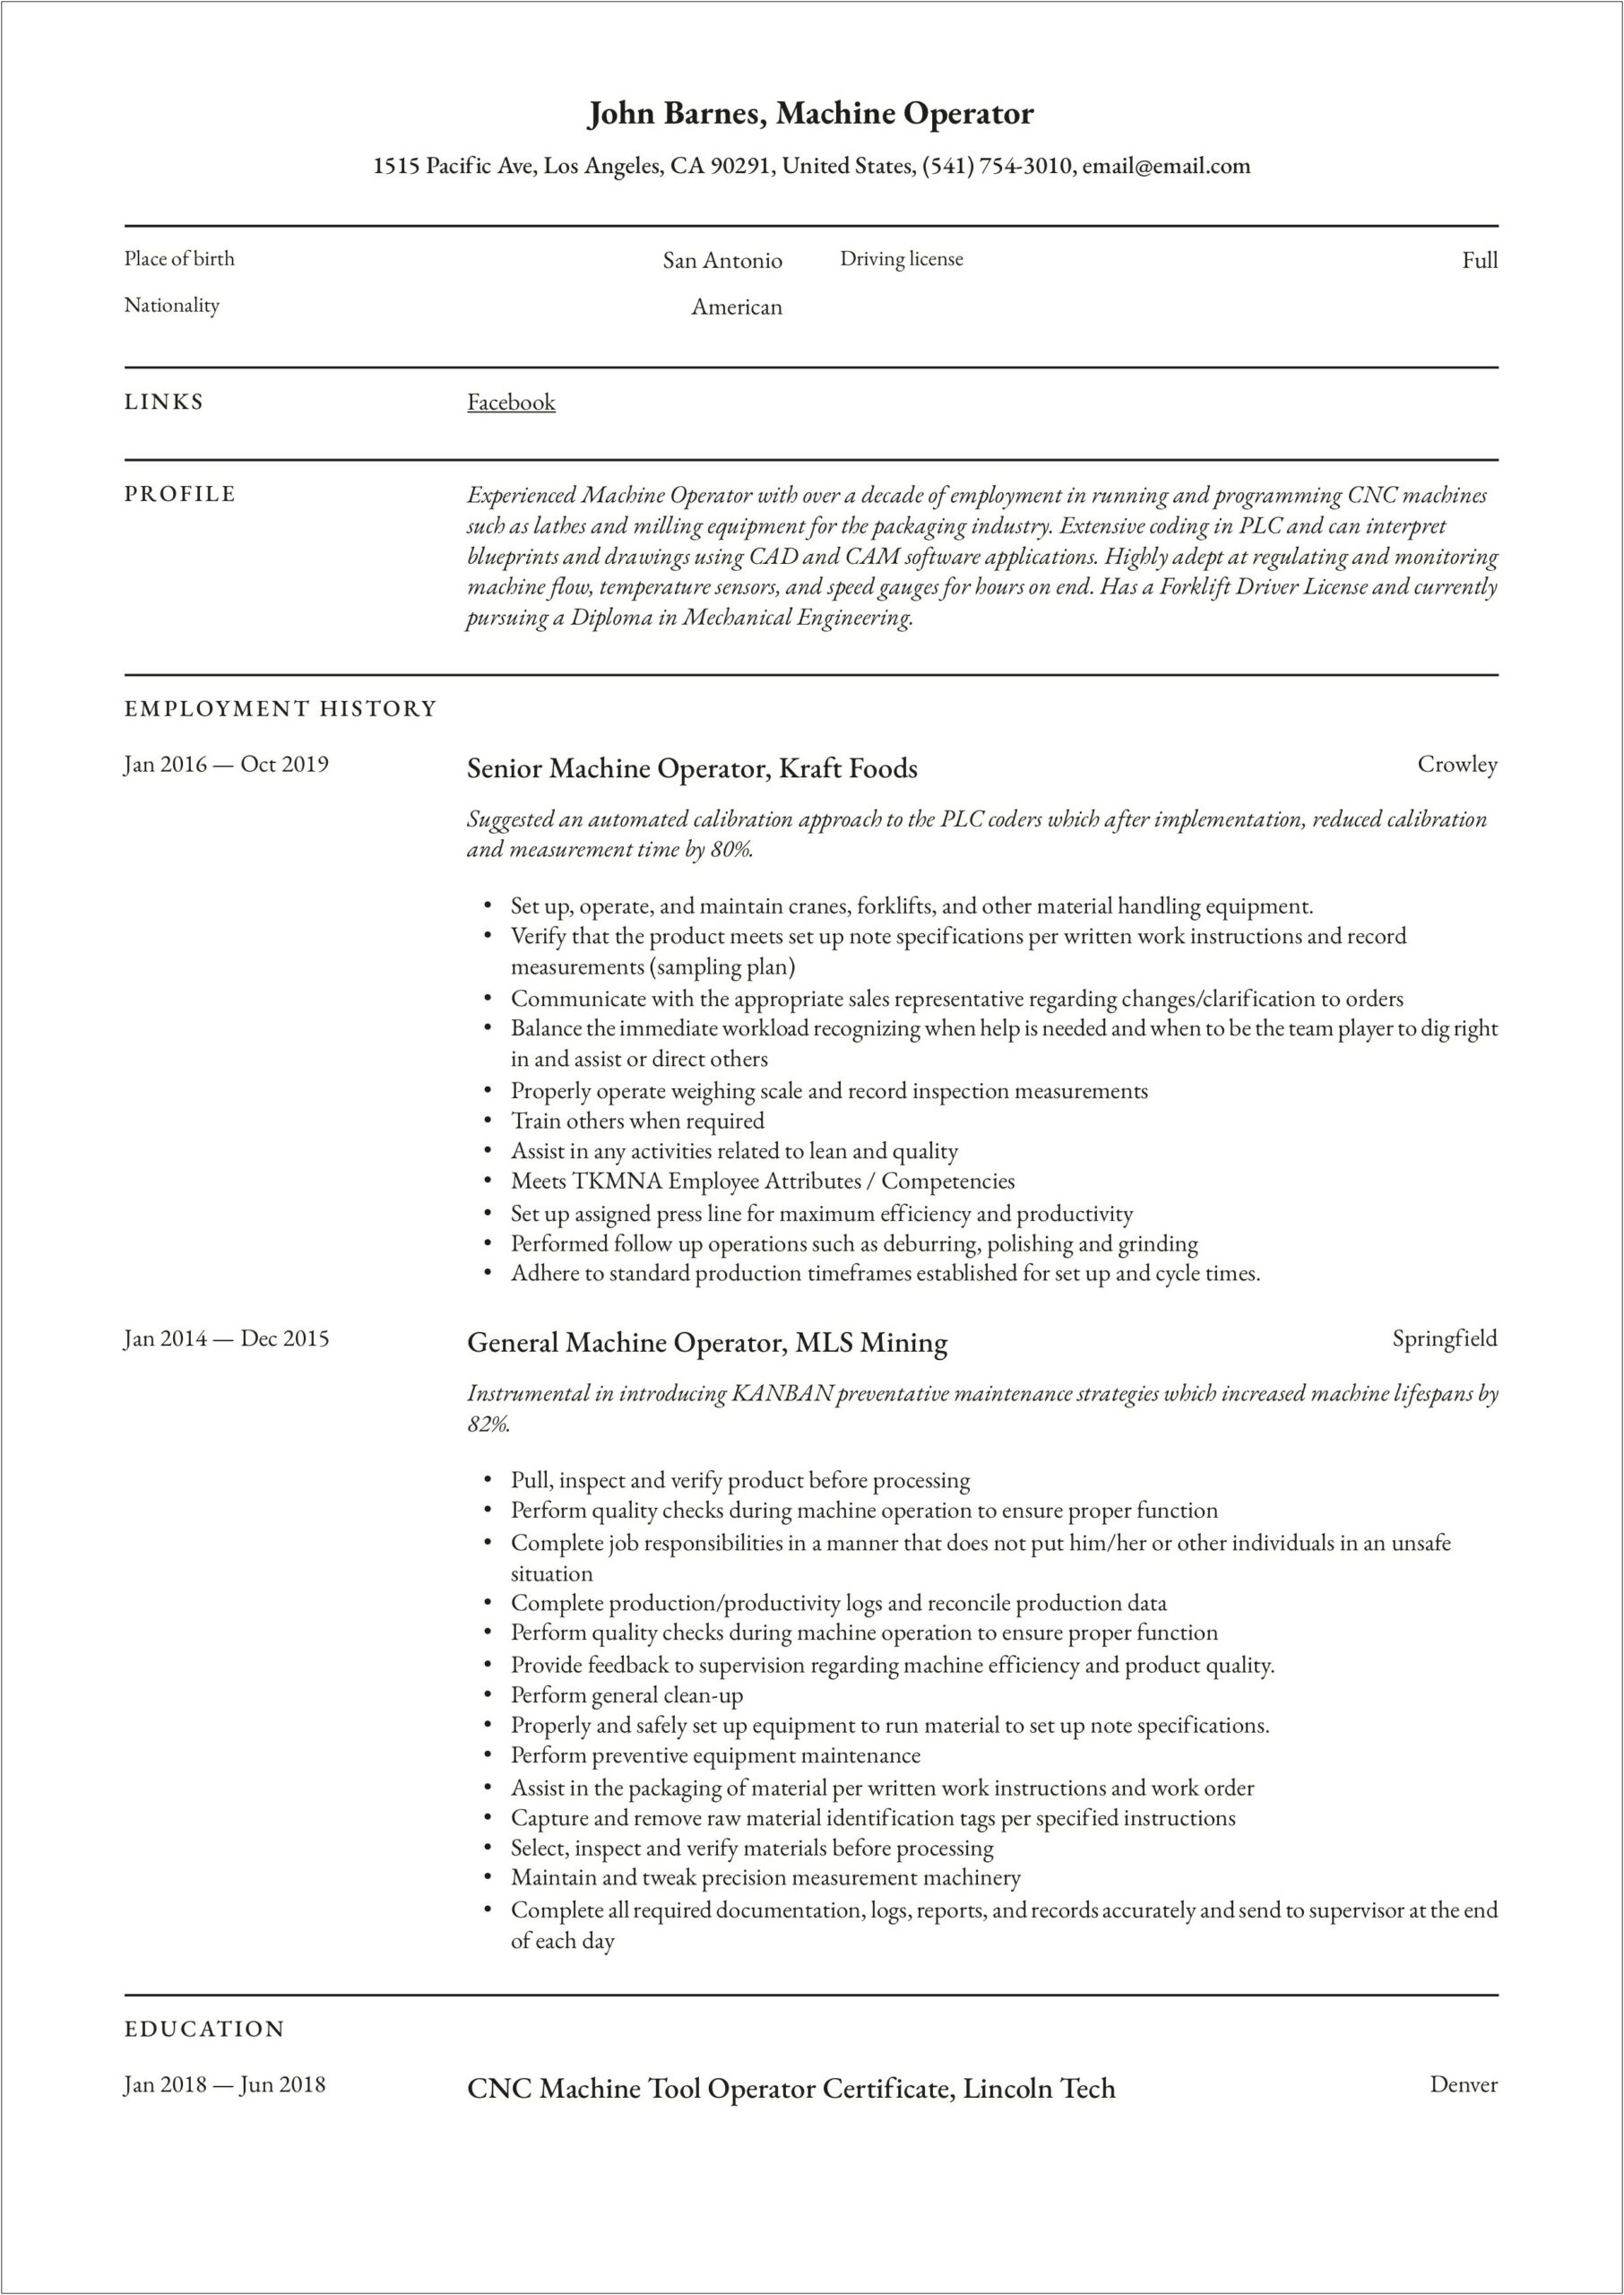 Resume Objective For Machinist Job